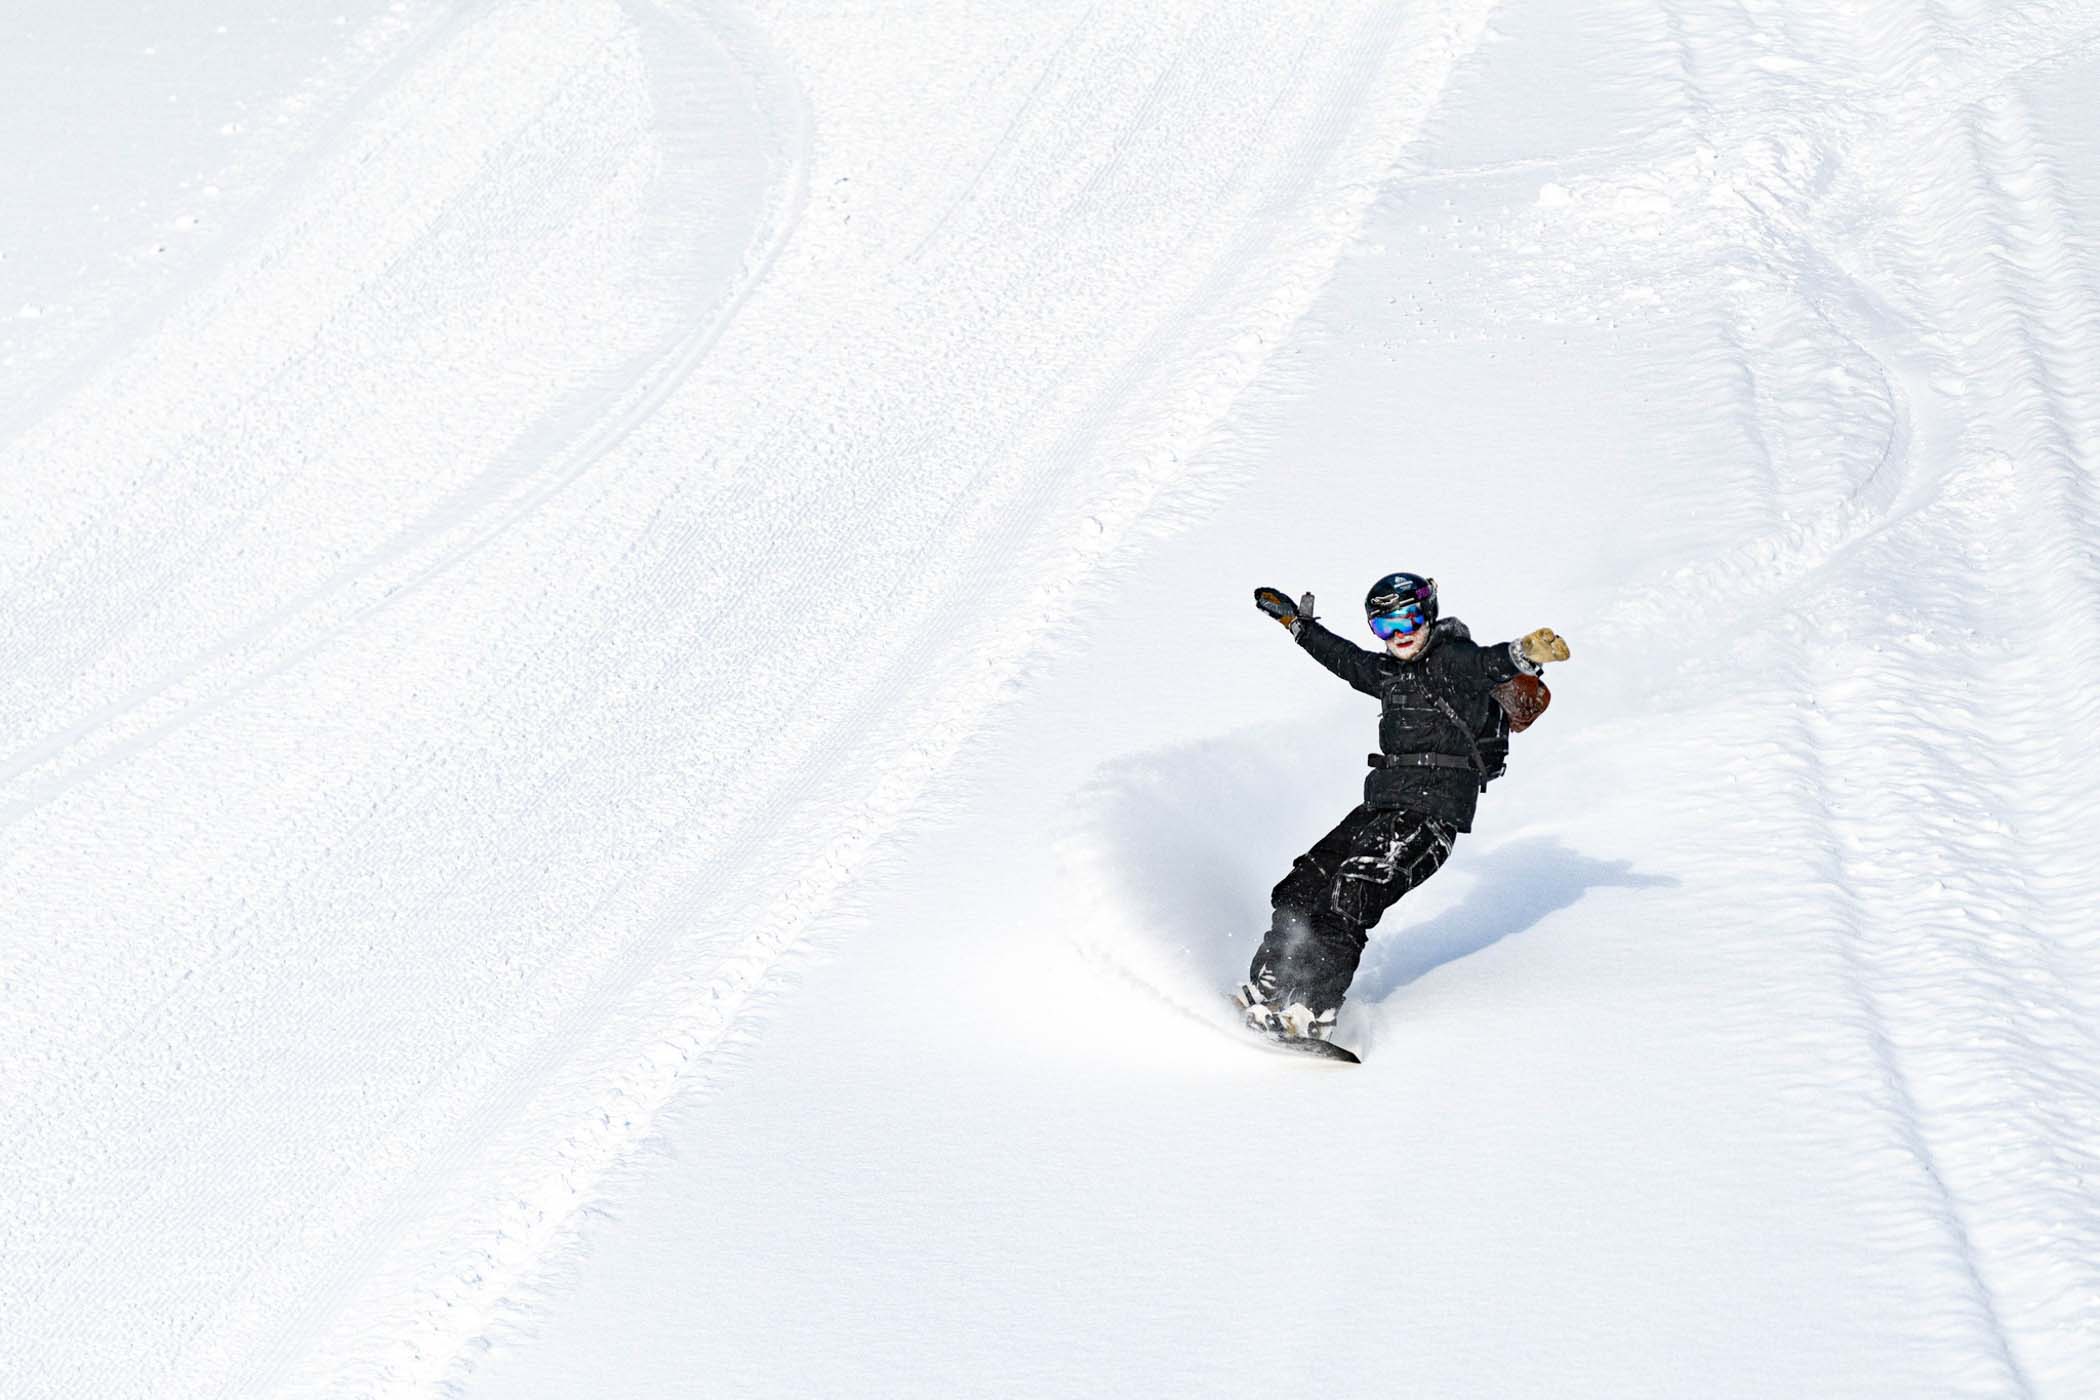 a snowboarder, snow in beard, opens arms as he descends fresh powder next. to the piste